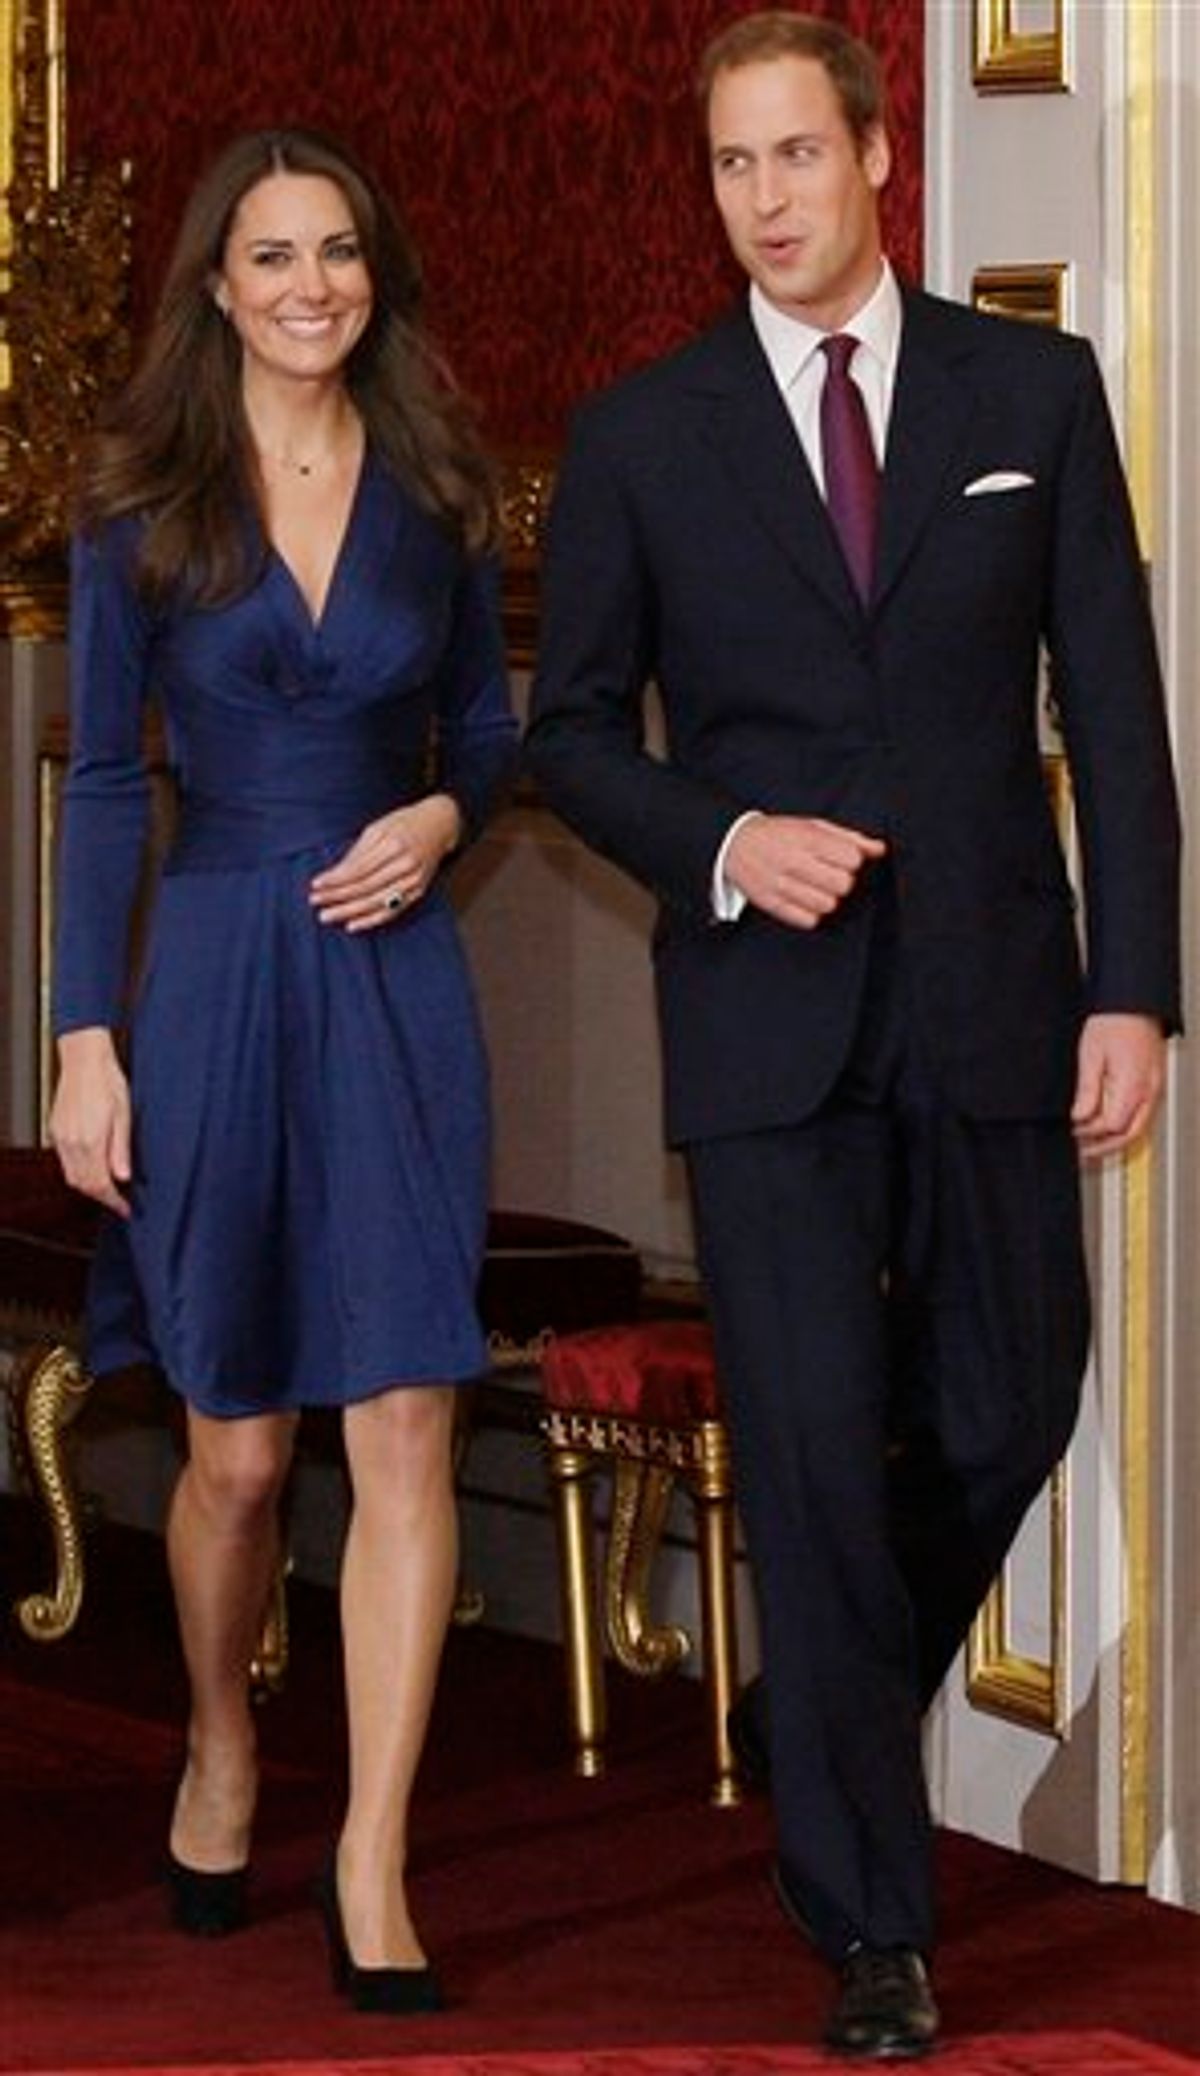 FILE - This is a Tuesday Nov. 16, 2010, file photo of  Britain's Prince William and his fiancee Kate Middleton arrive for a media photocall, media at St. James's Palace in London, Tuesday Nov. 16, 2010, after they announced their engagement. The couple are to wed in 2011.  The wedding of Britain's Prince William and Kate Middleton is in 100 days time on April 29, 2011. (AP Photo/Sang Tan, File)  (AP)